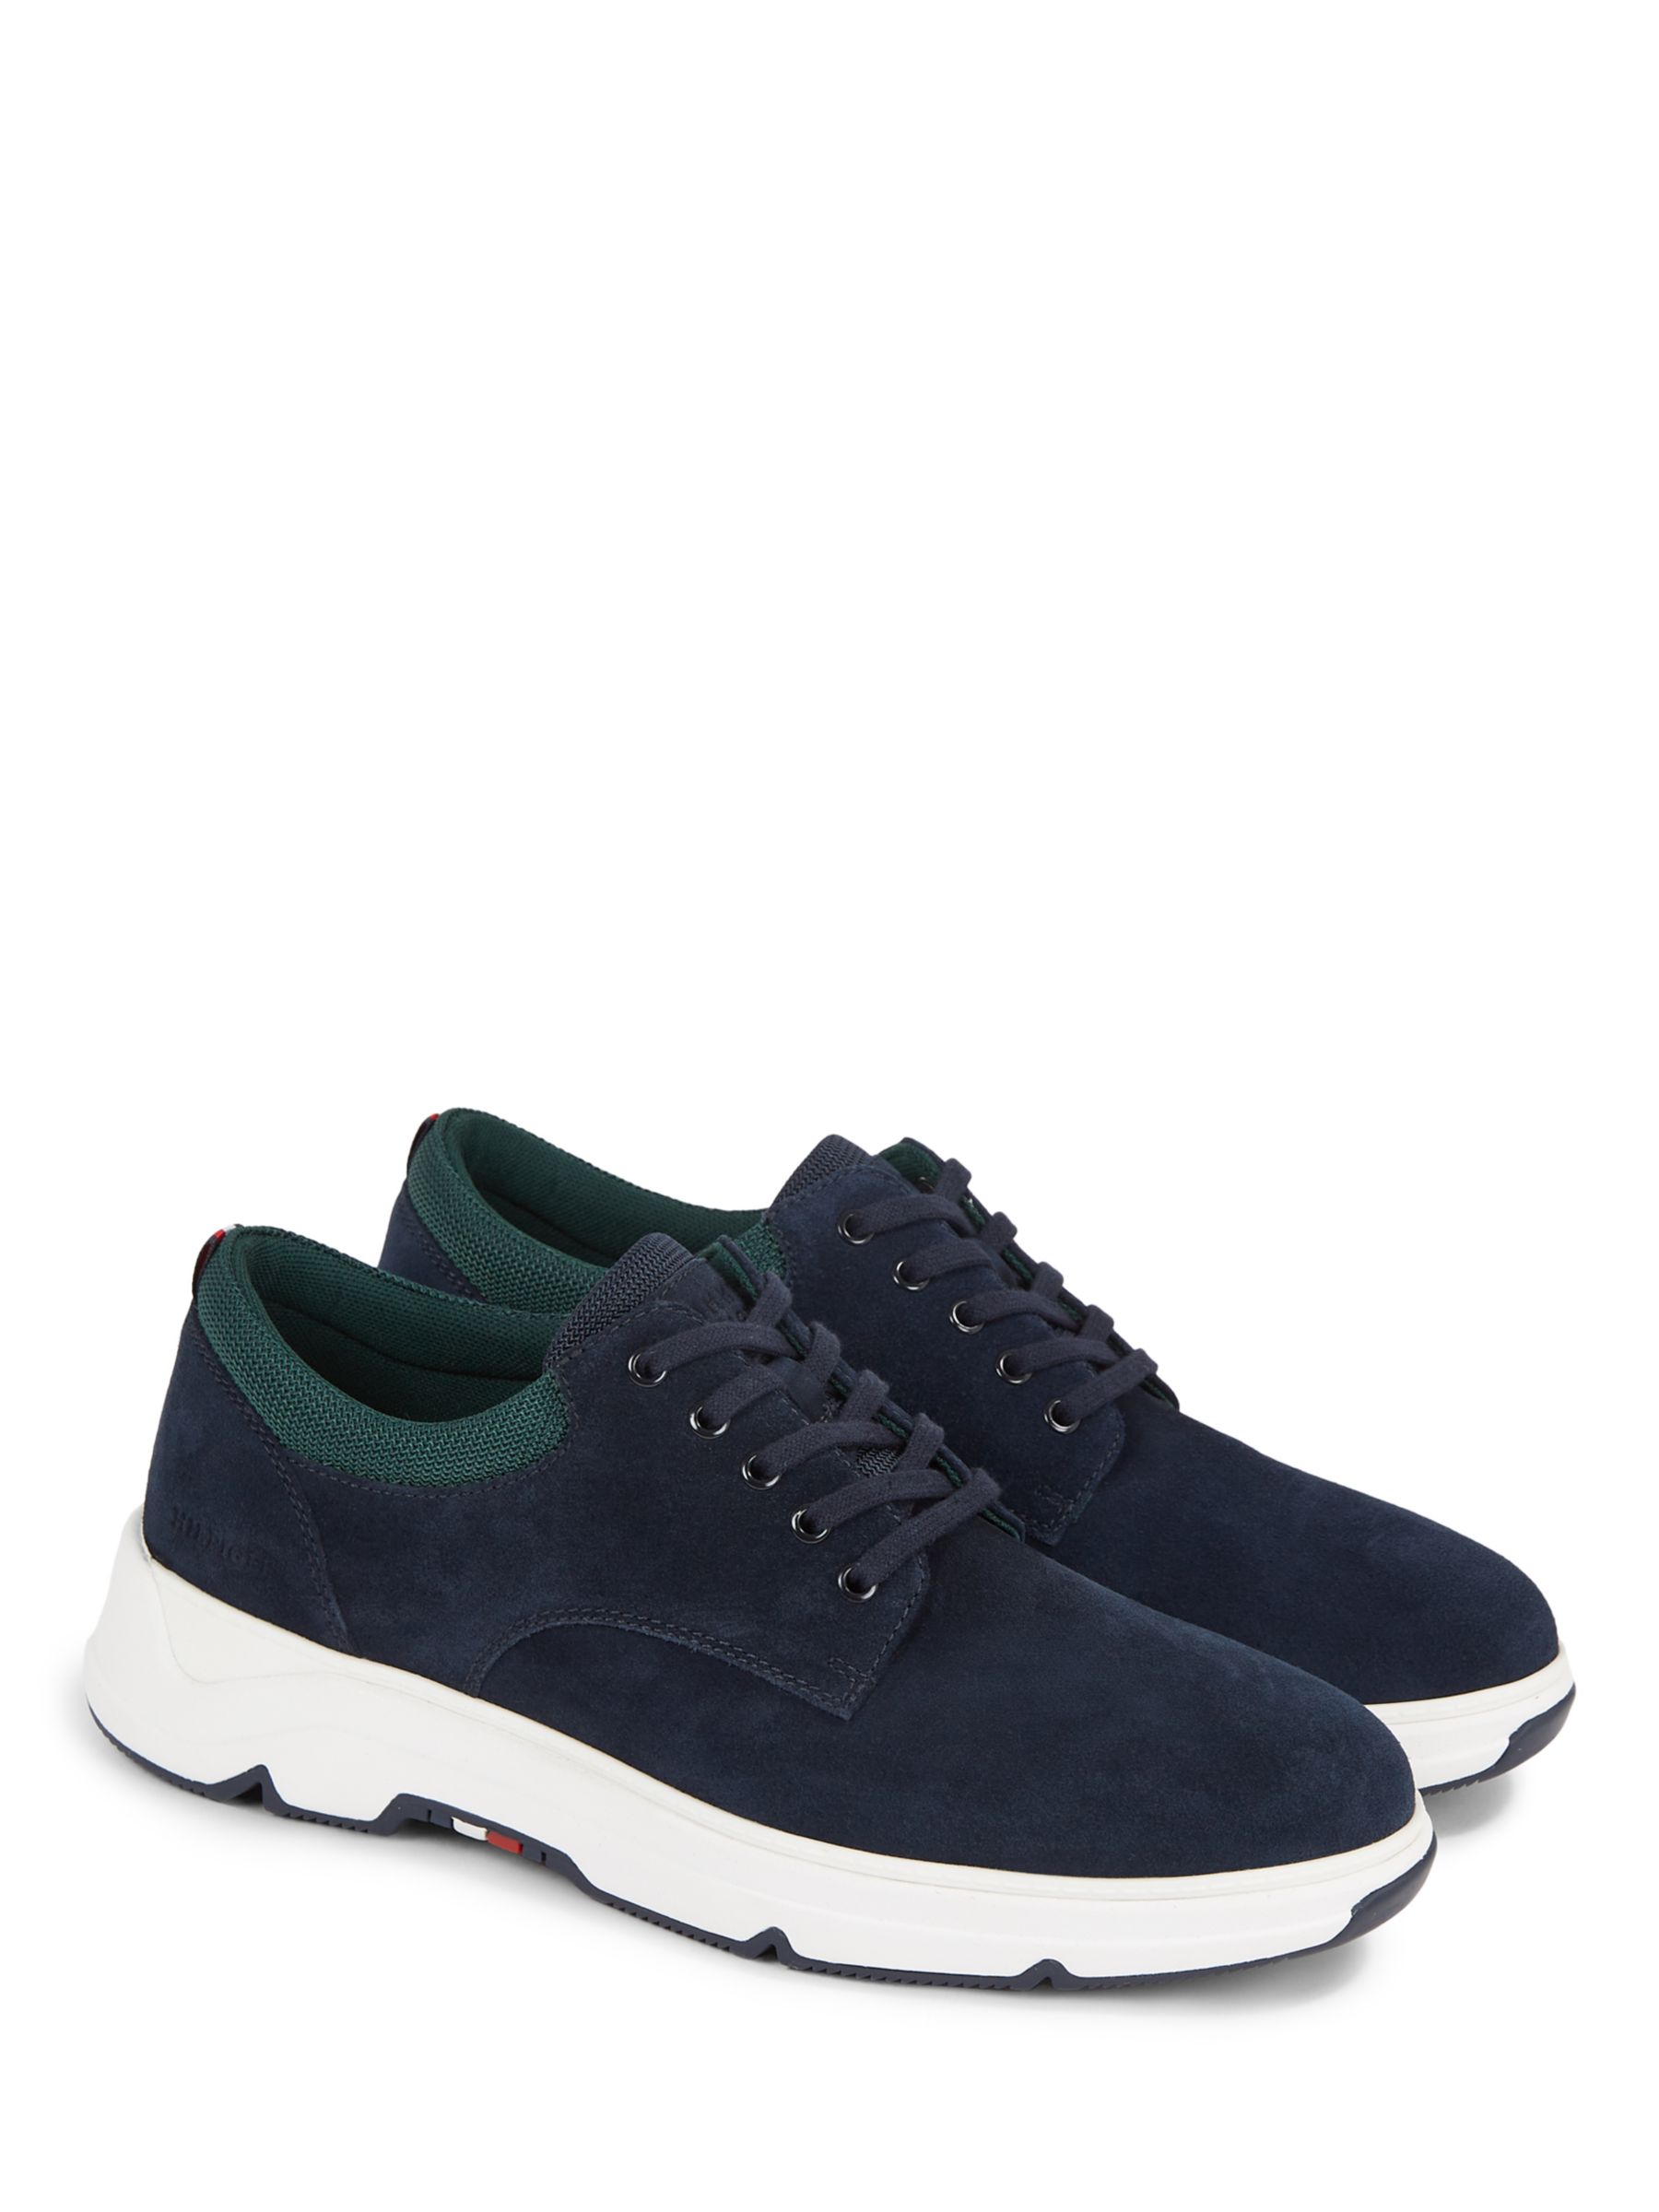 Buy Tommy Hilfiger Hybrid Suede Lace Up Trainers, Desert Sky Online at johnlewis.com